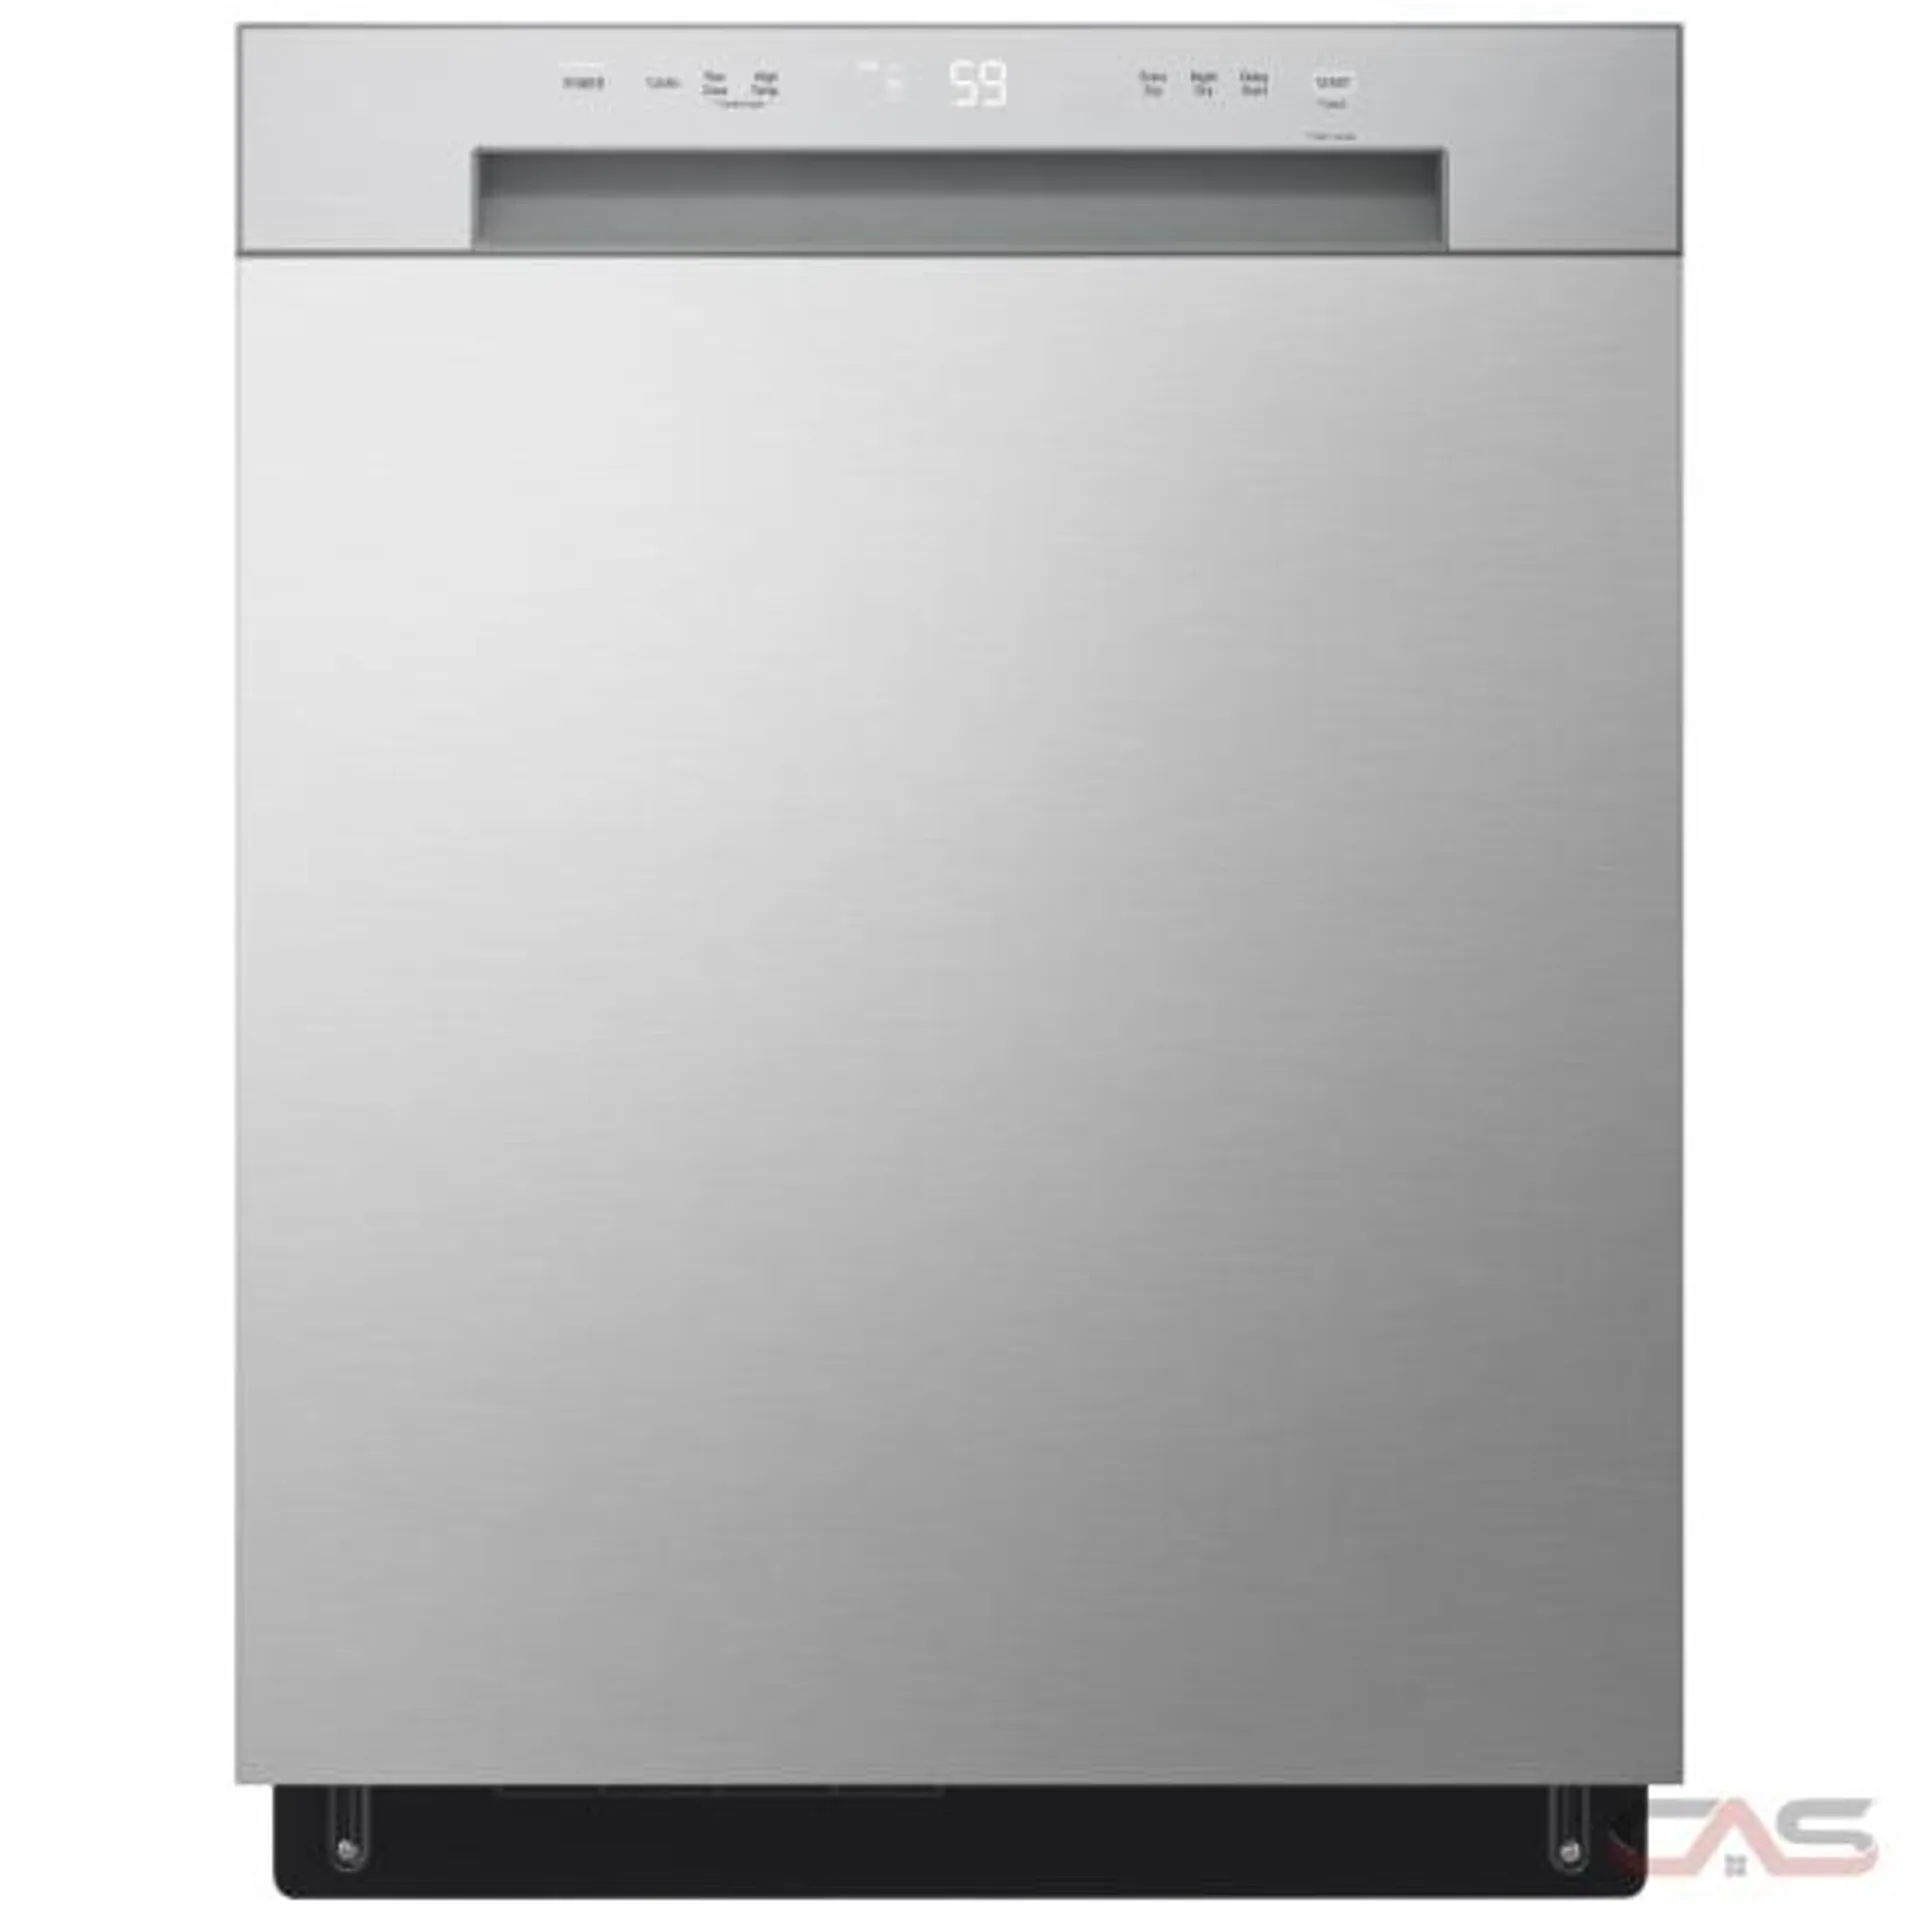 LG LDFC2423V Dishwasher, 24 inch Exterior Width, 52 dB Decibel Level, Stainless Steel (Interior), 4 Wash Cycles, 15 Capacity (Place Settings), Platinum Silver Steel colour